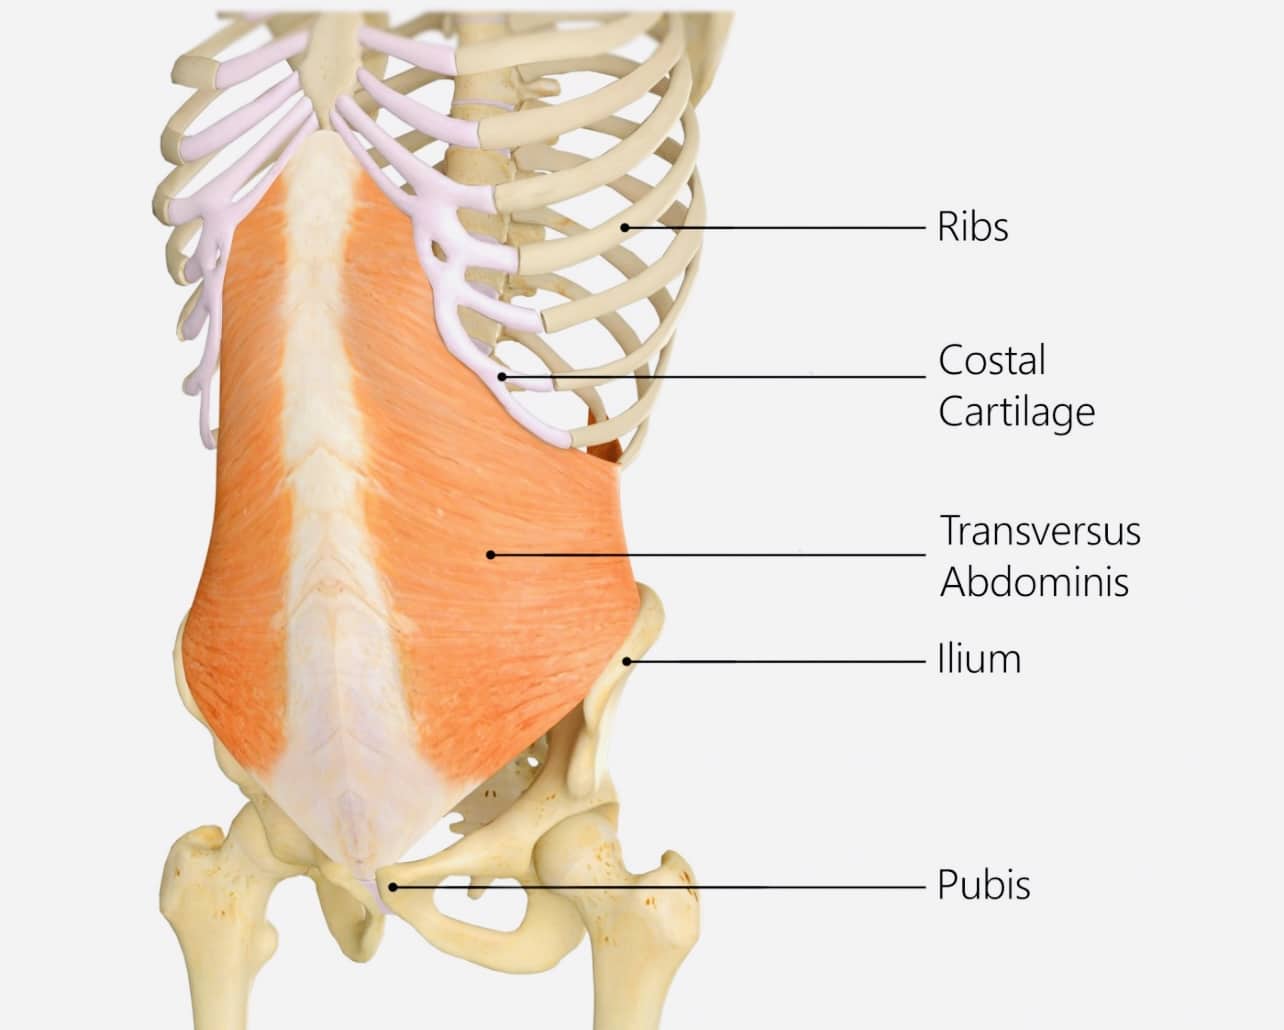 A cross-sectional view of the torso, focusing on the abdominal region. The transverse abdominis muscle, depicted in shades of red, lies deep within the abdominal wall.